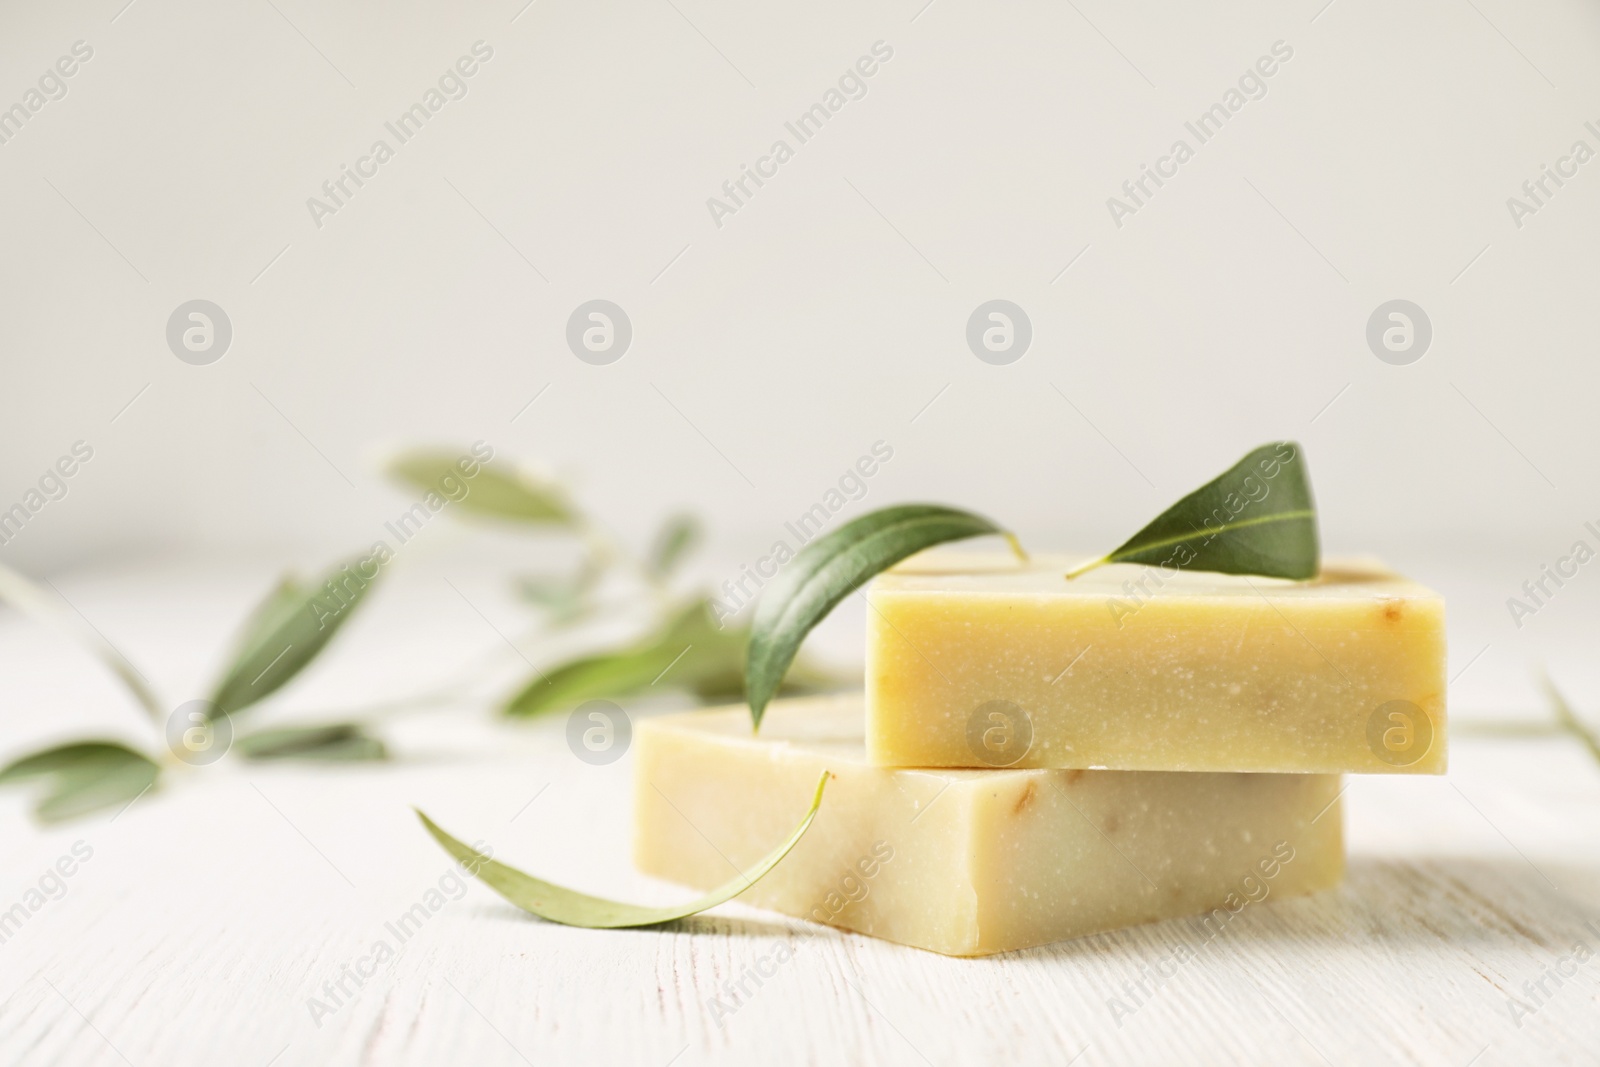 Photo of Handmade soap bars and olive leaves on white table. Space for text